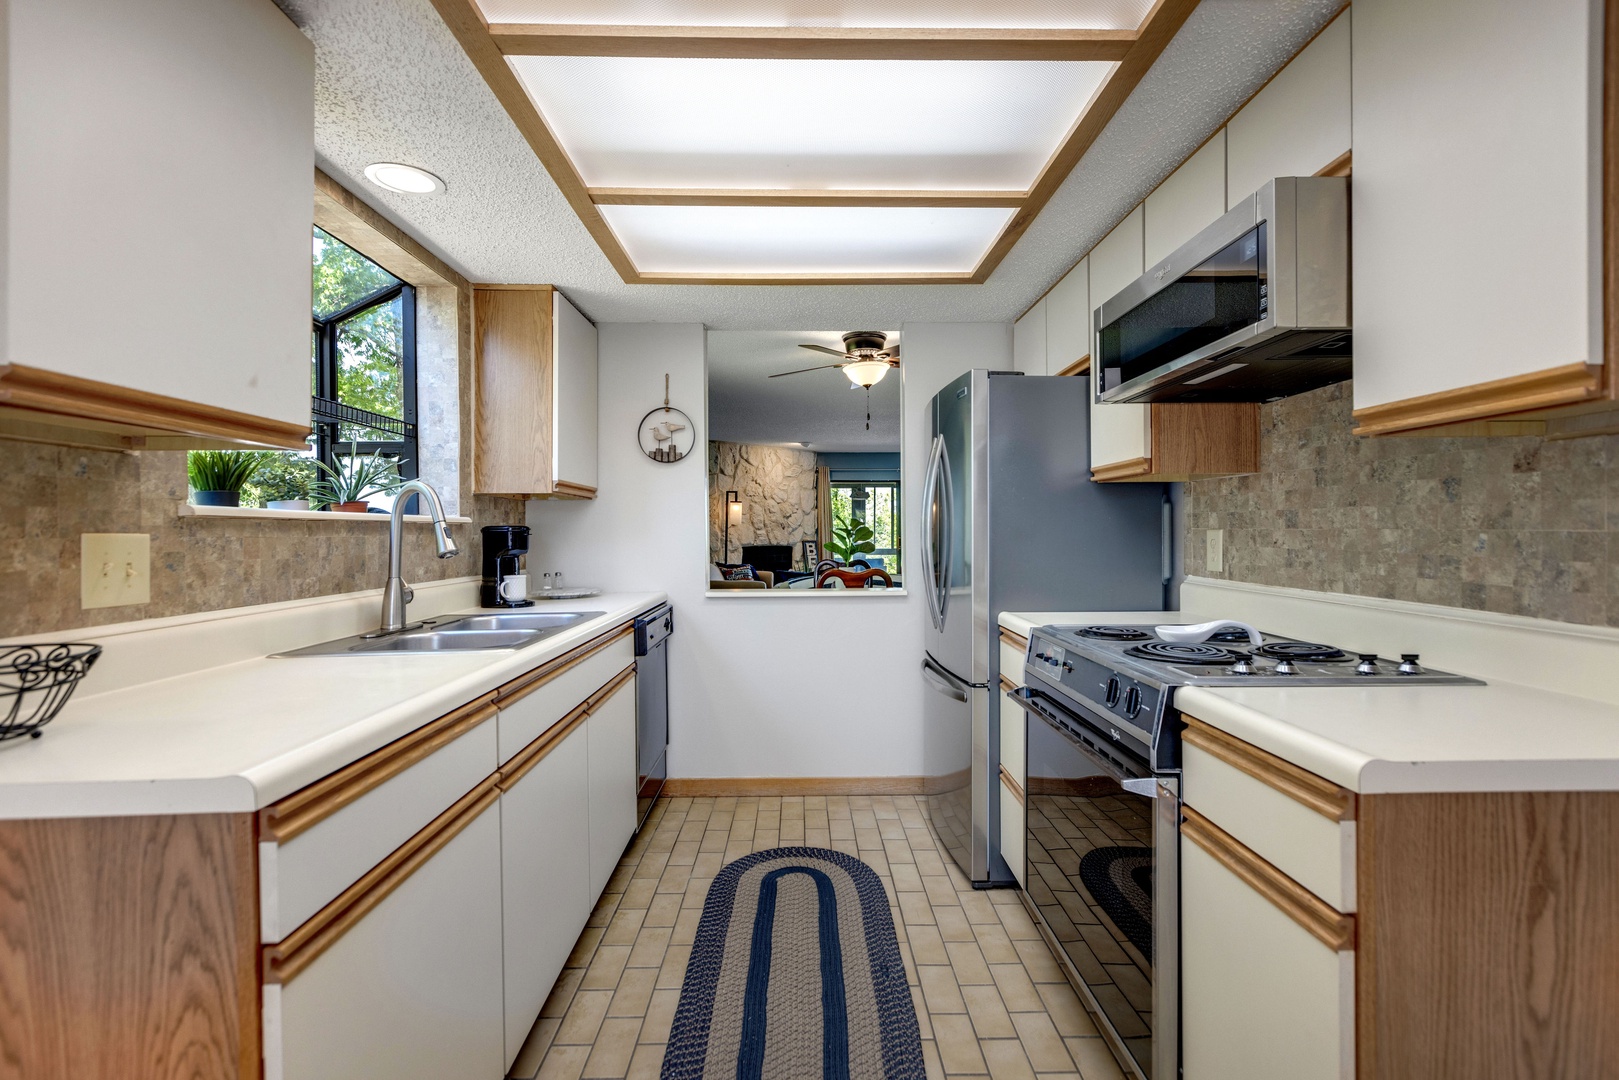 The quaint kitchen offers ample space and all the comforts of home